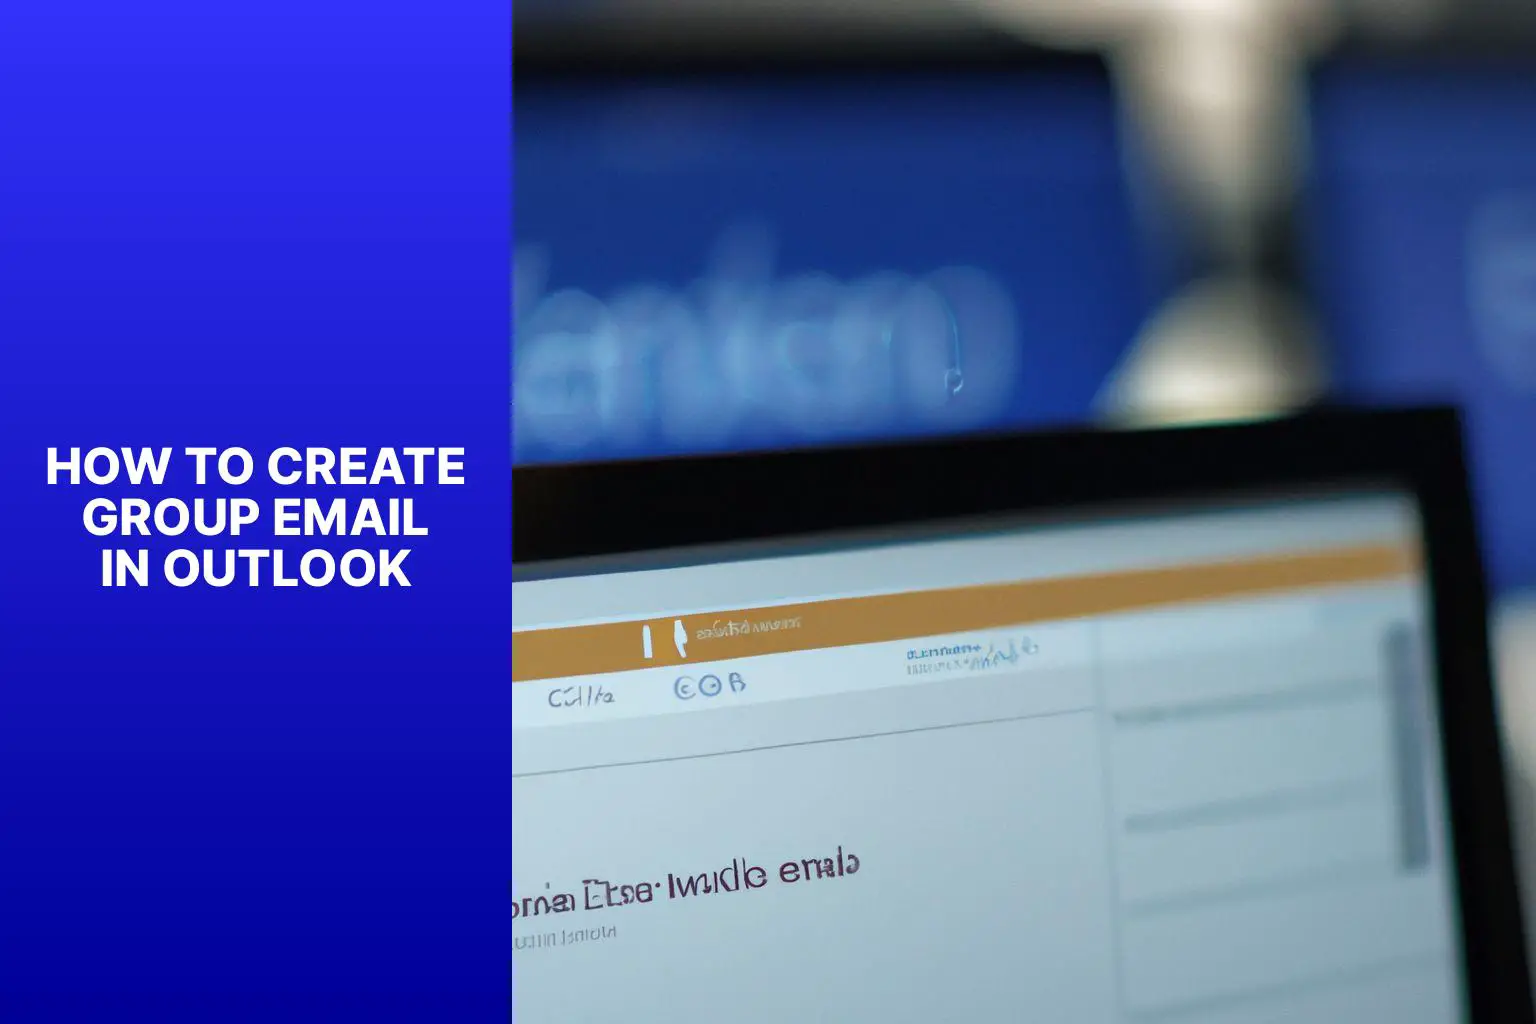 Step-by-Step Guide to Creating Group Email in Outlook